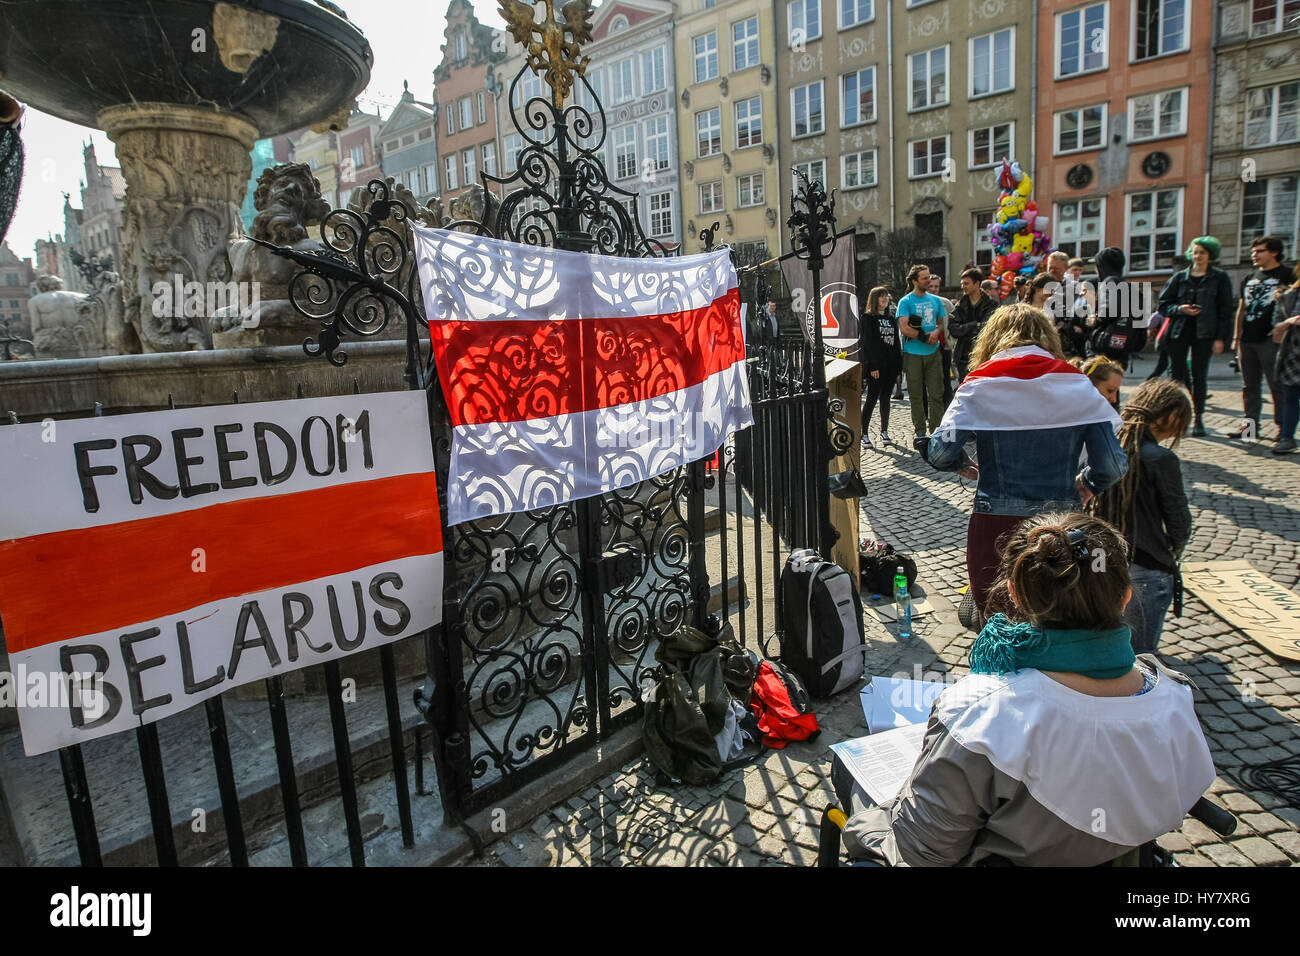 Gdansk, Poland. 02nd Apr, 2017. Freedom for Belarus slogan painted on hitorical Belarussian flag is seen  Gdansk, Poland on 2 April 2017  . Belarussian opposition activists and students living in Poland organized demonstartion to support protesters in Belarus, against President Alexander Lukashenko new tax levied against the unemployed in Belarus. Demonstrations and marches have been held in sites throughout the Belarus with sizes of several hundred to several thousand gathering at a given time. Credit: Michal Fludra/Alamy Live News Stock Photo